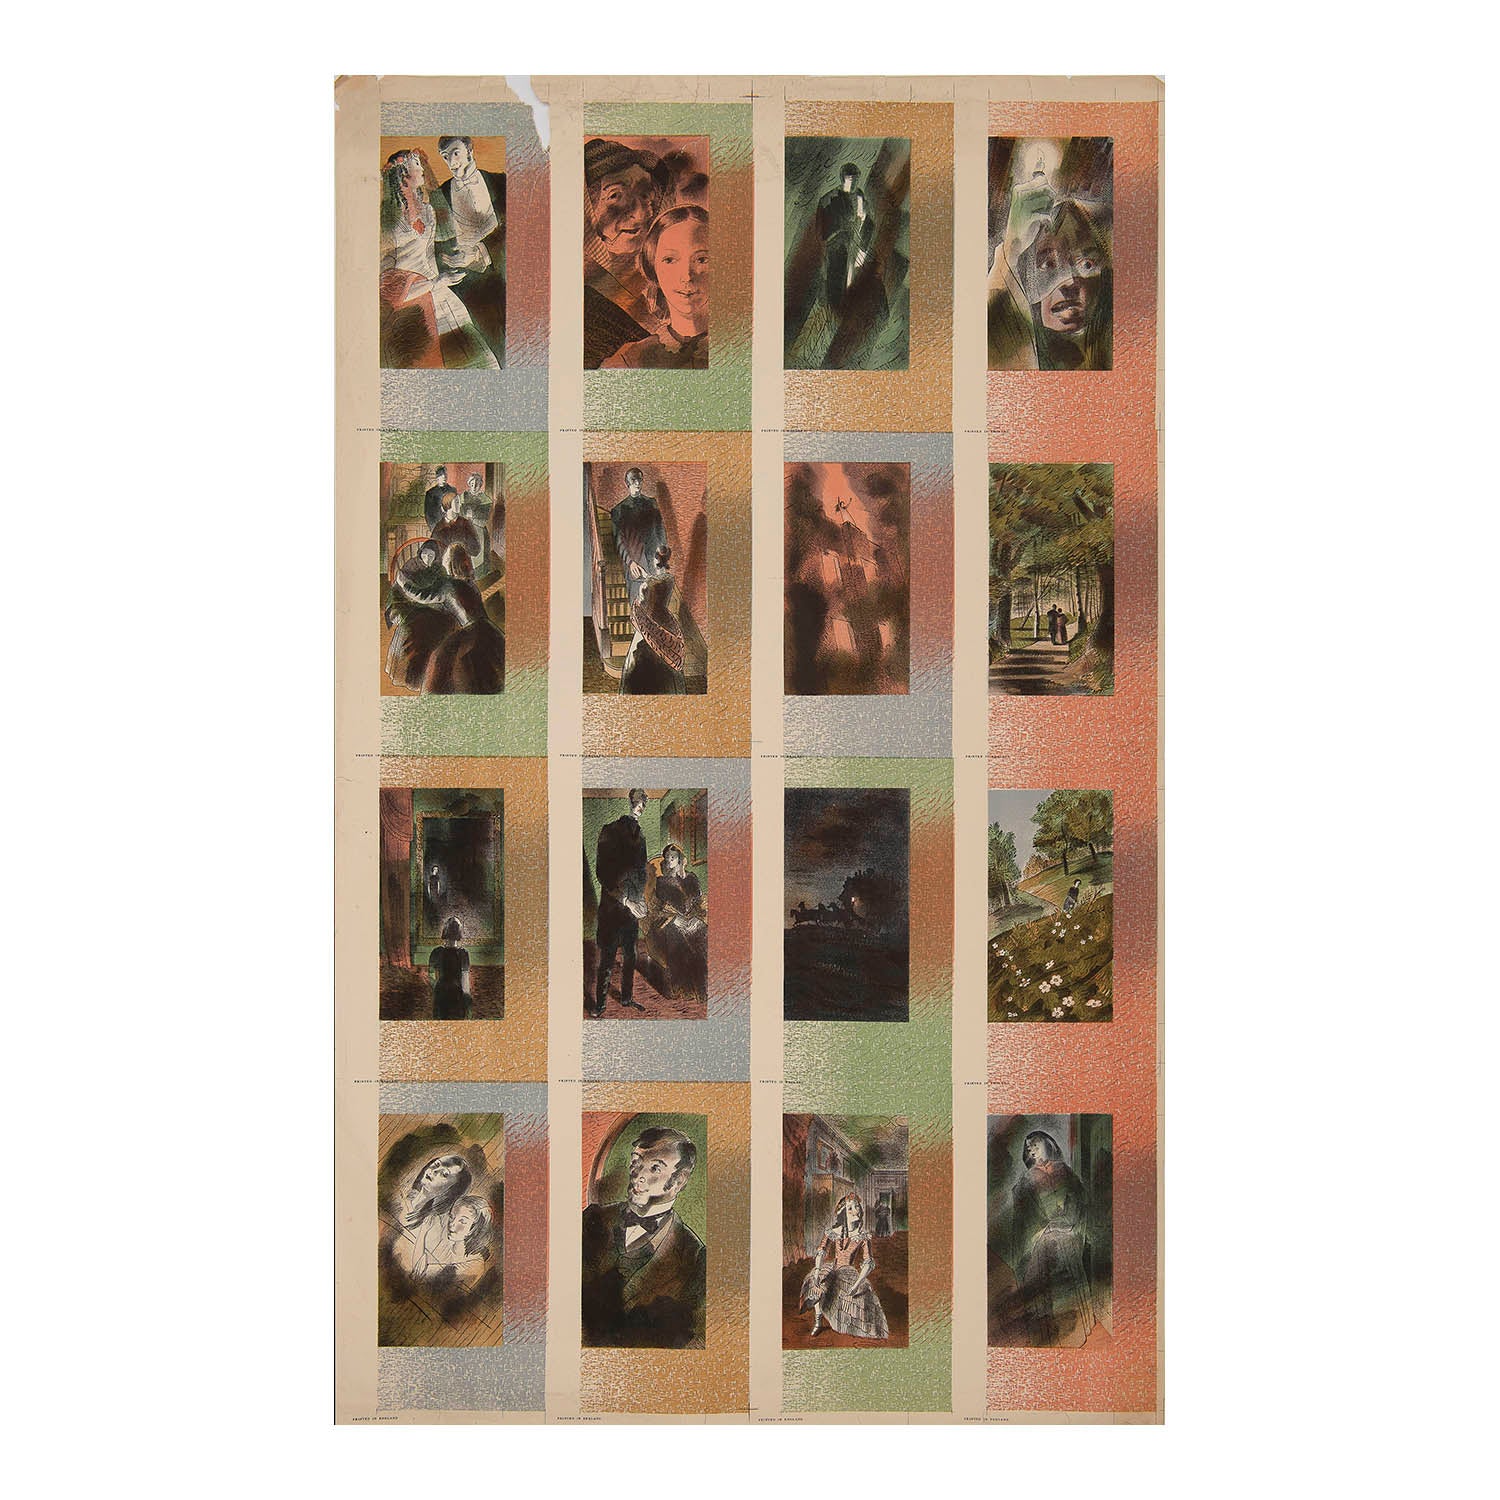 proof sheet of 16 lithographs from Jane Eyre (Charlotte Brontë'), by the British painter and artist-designer, Barnett Freedman, printed by the Curwen Press in 1942